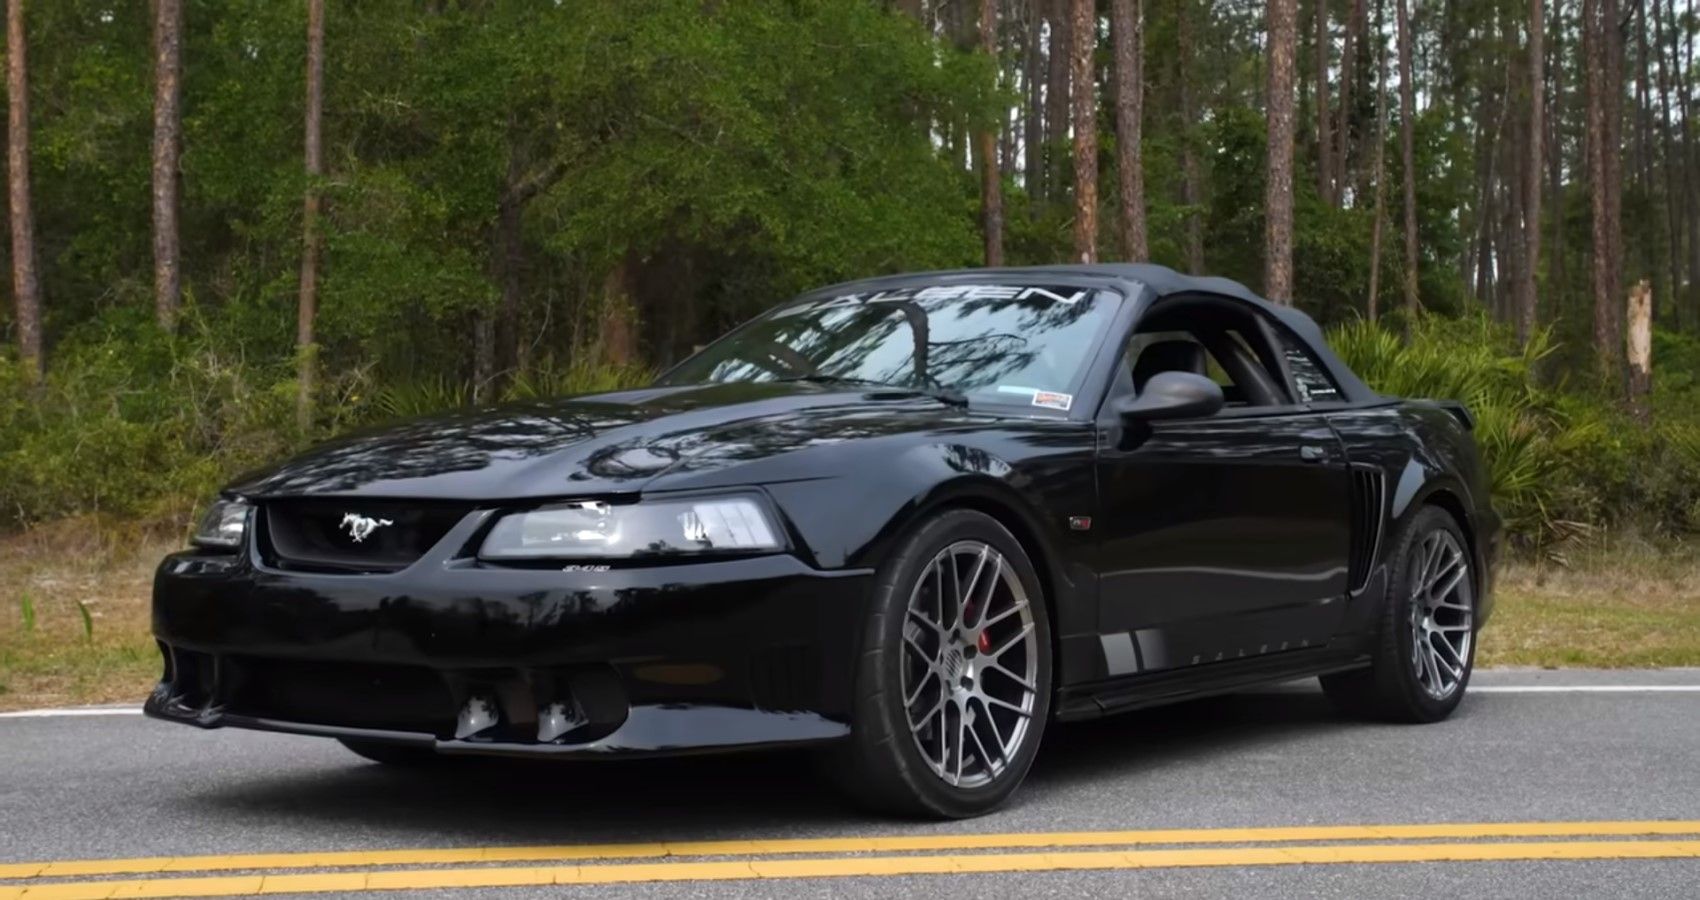 Saleen S281 Ford Mustang, front quarter view